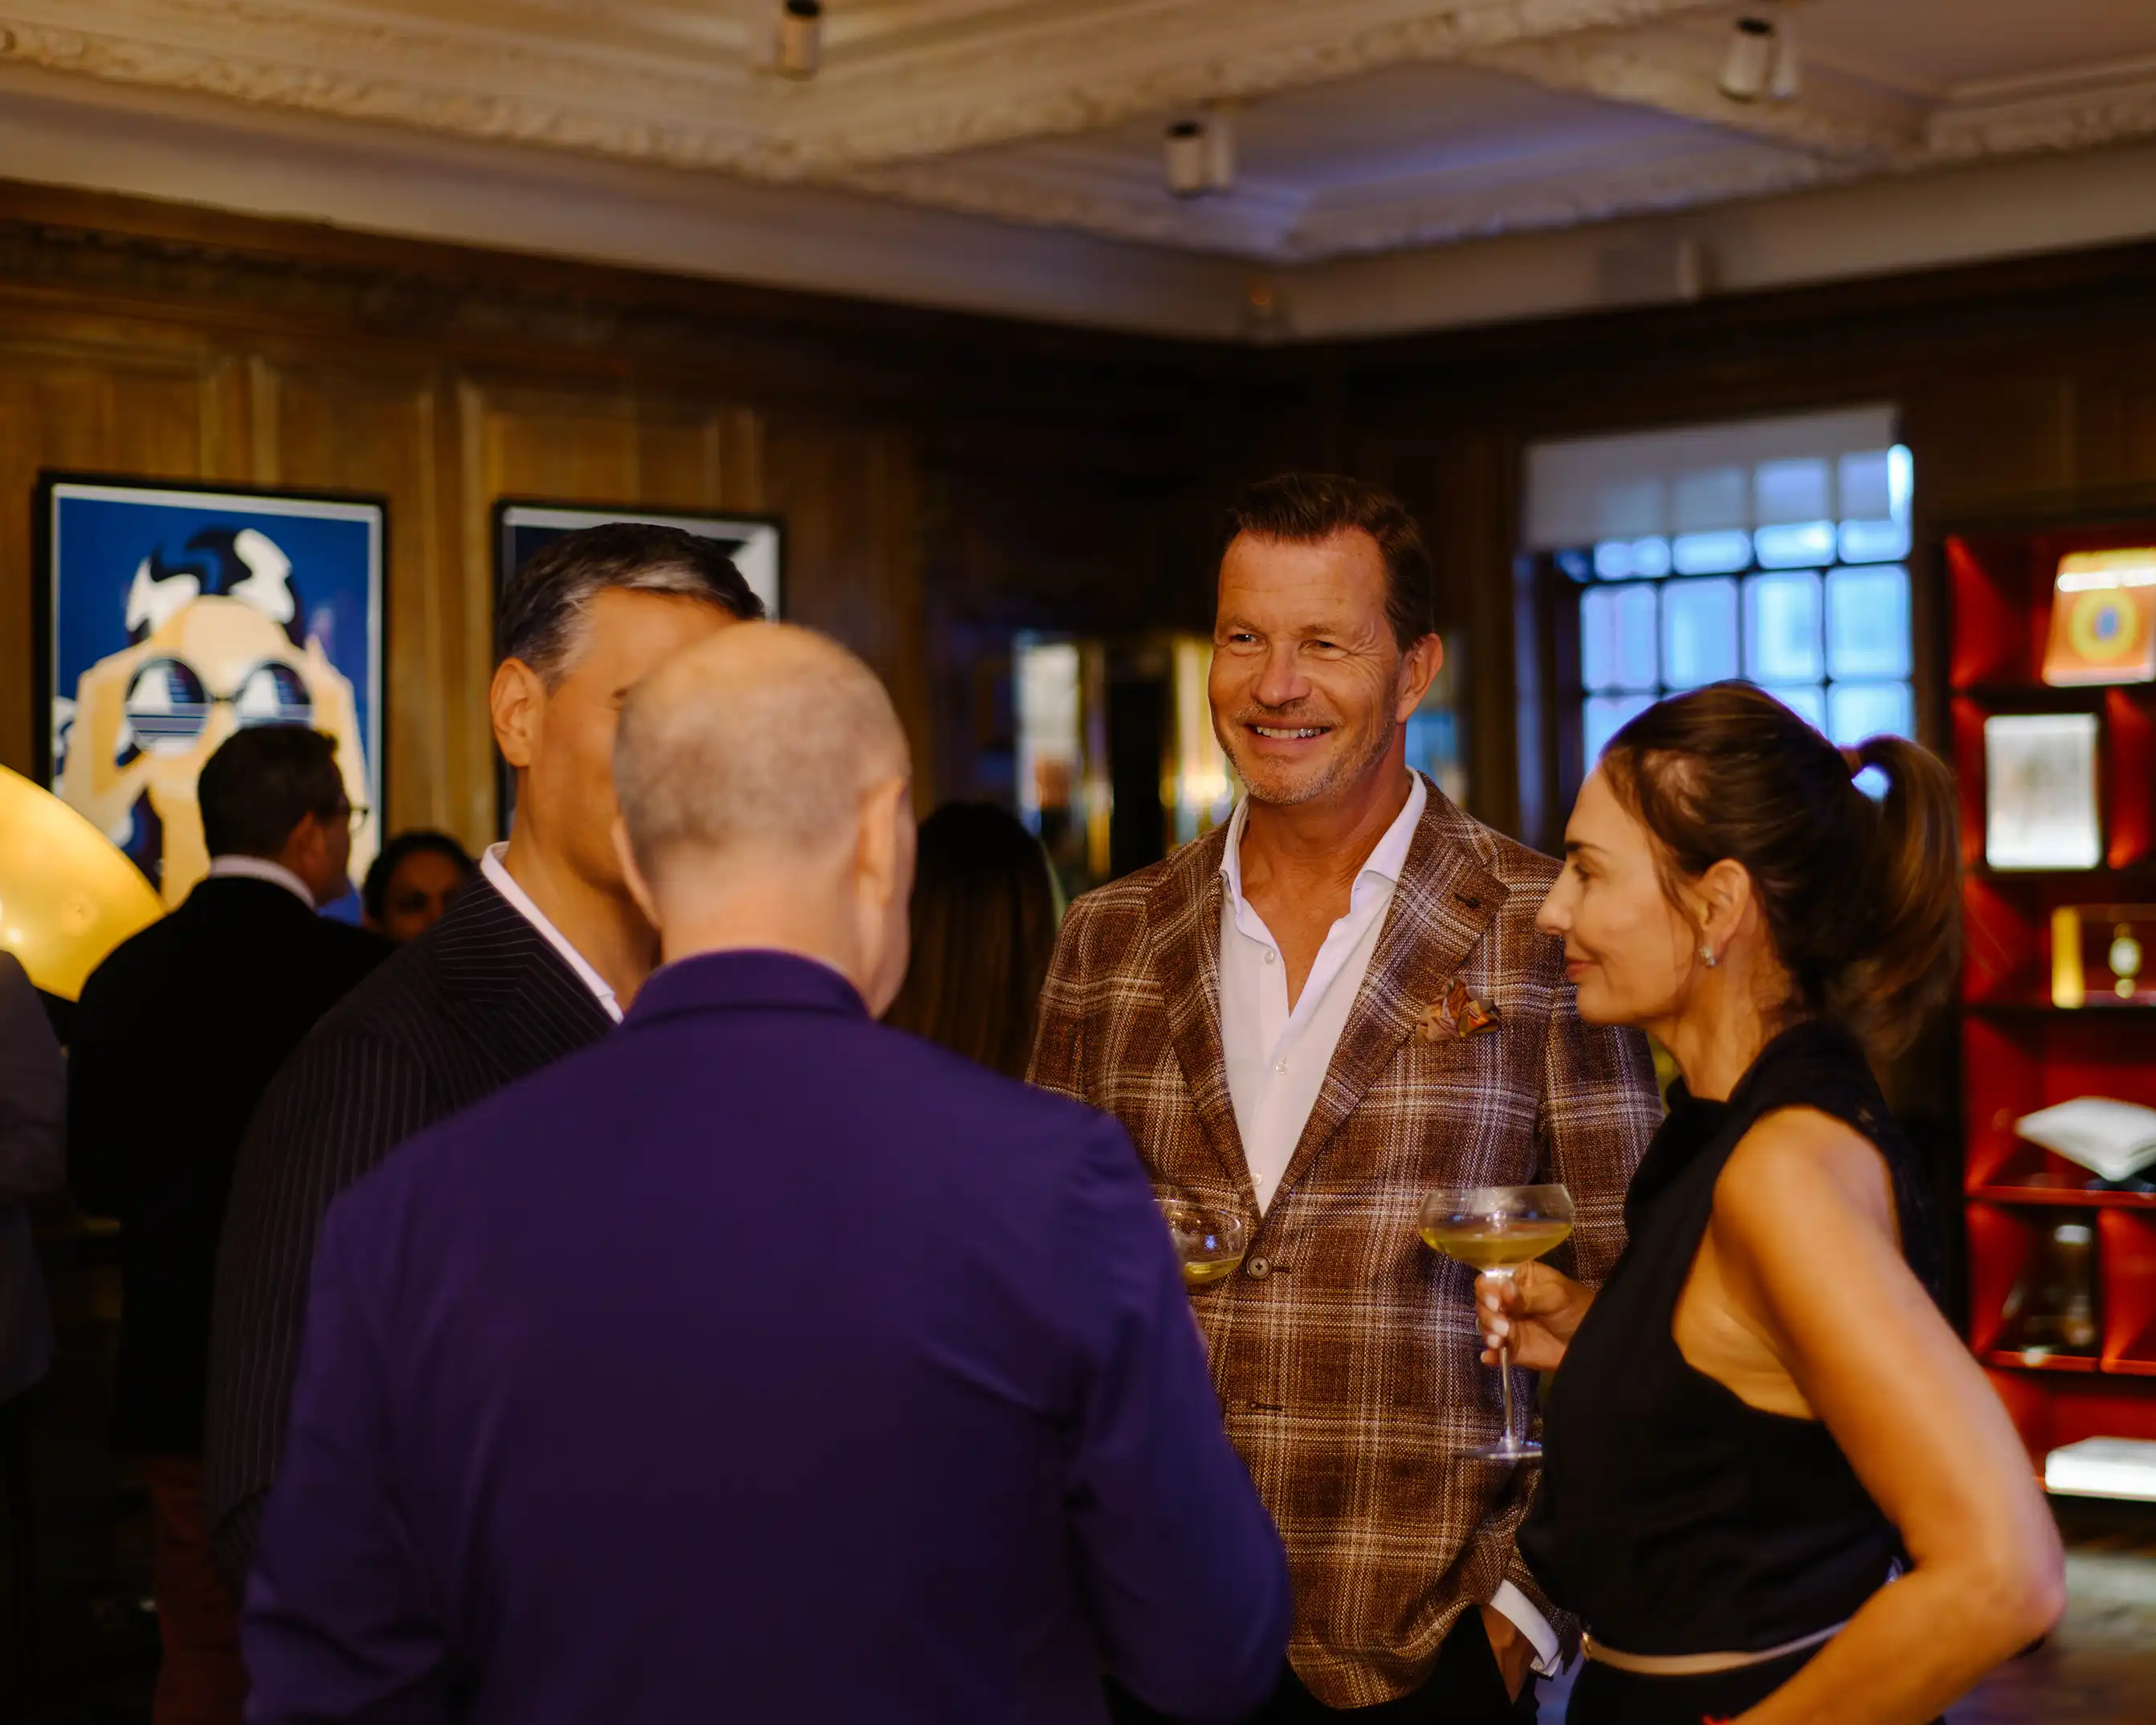  Guests Mingling at Maison Assouline in London 